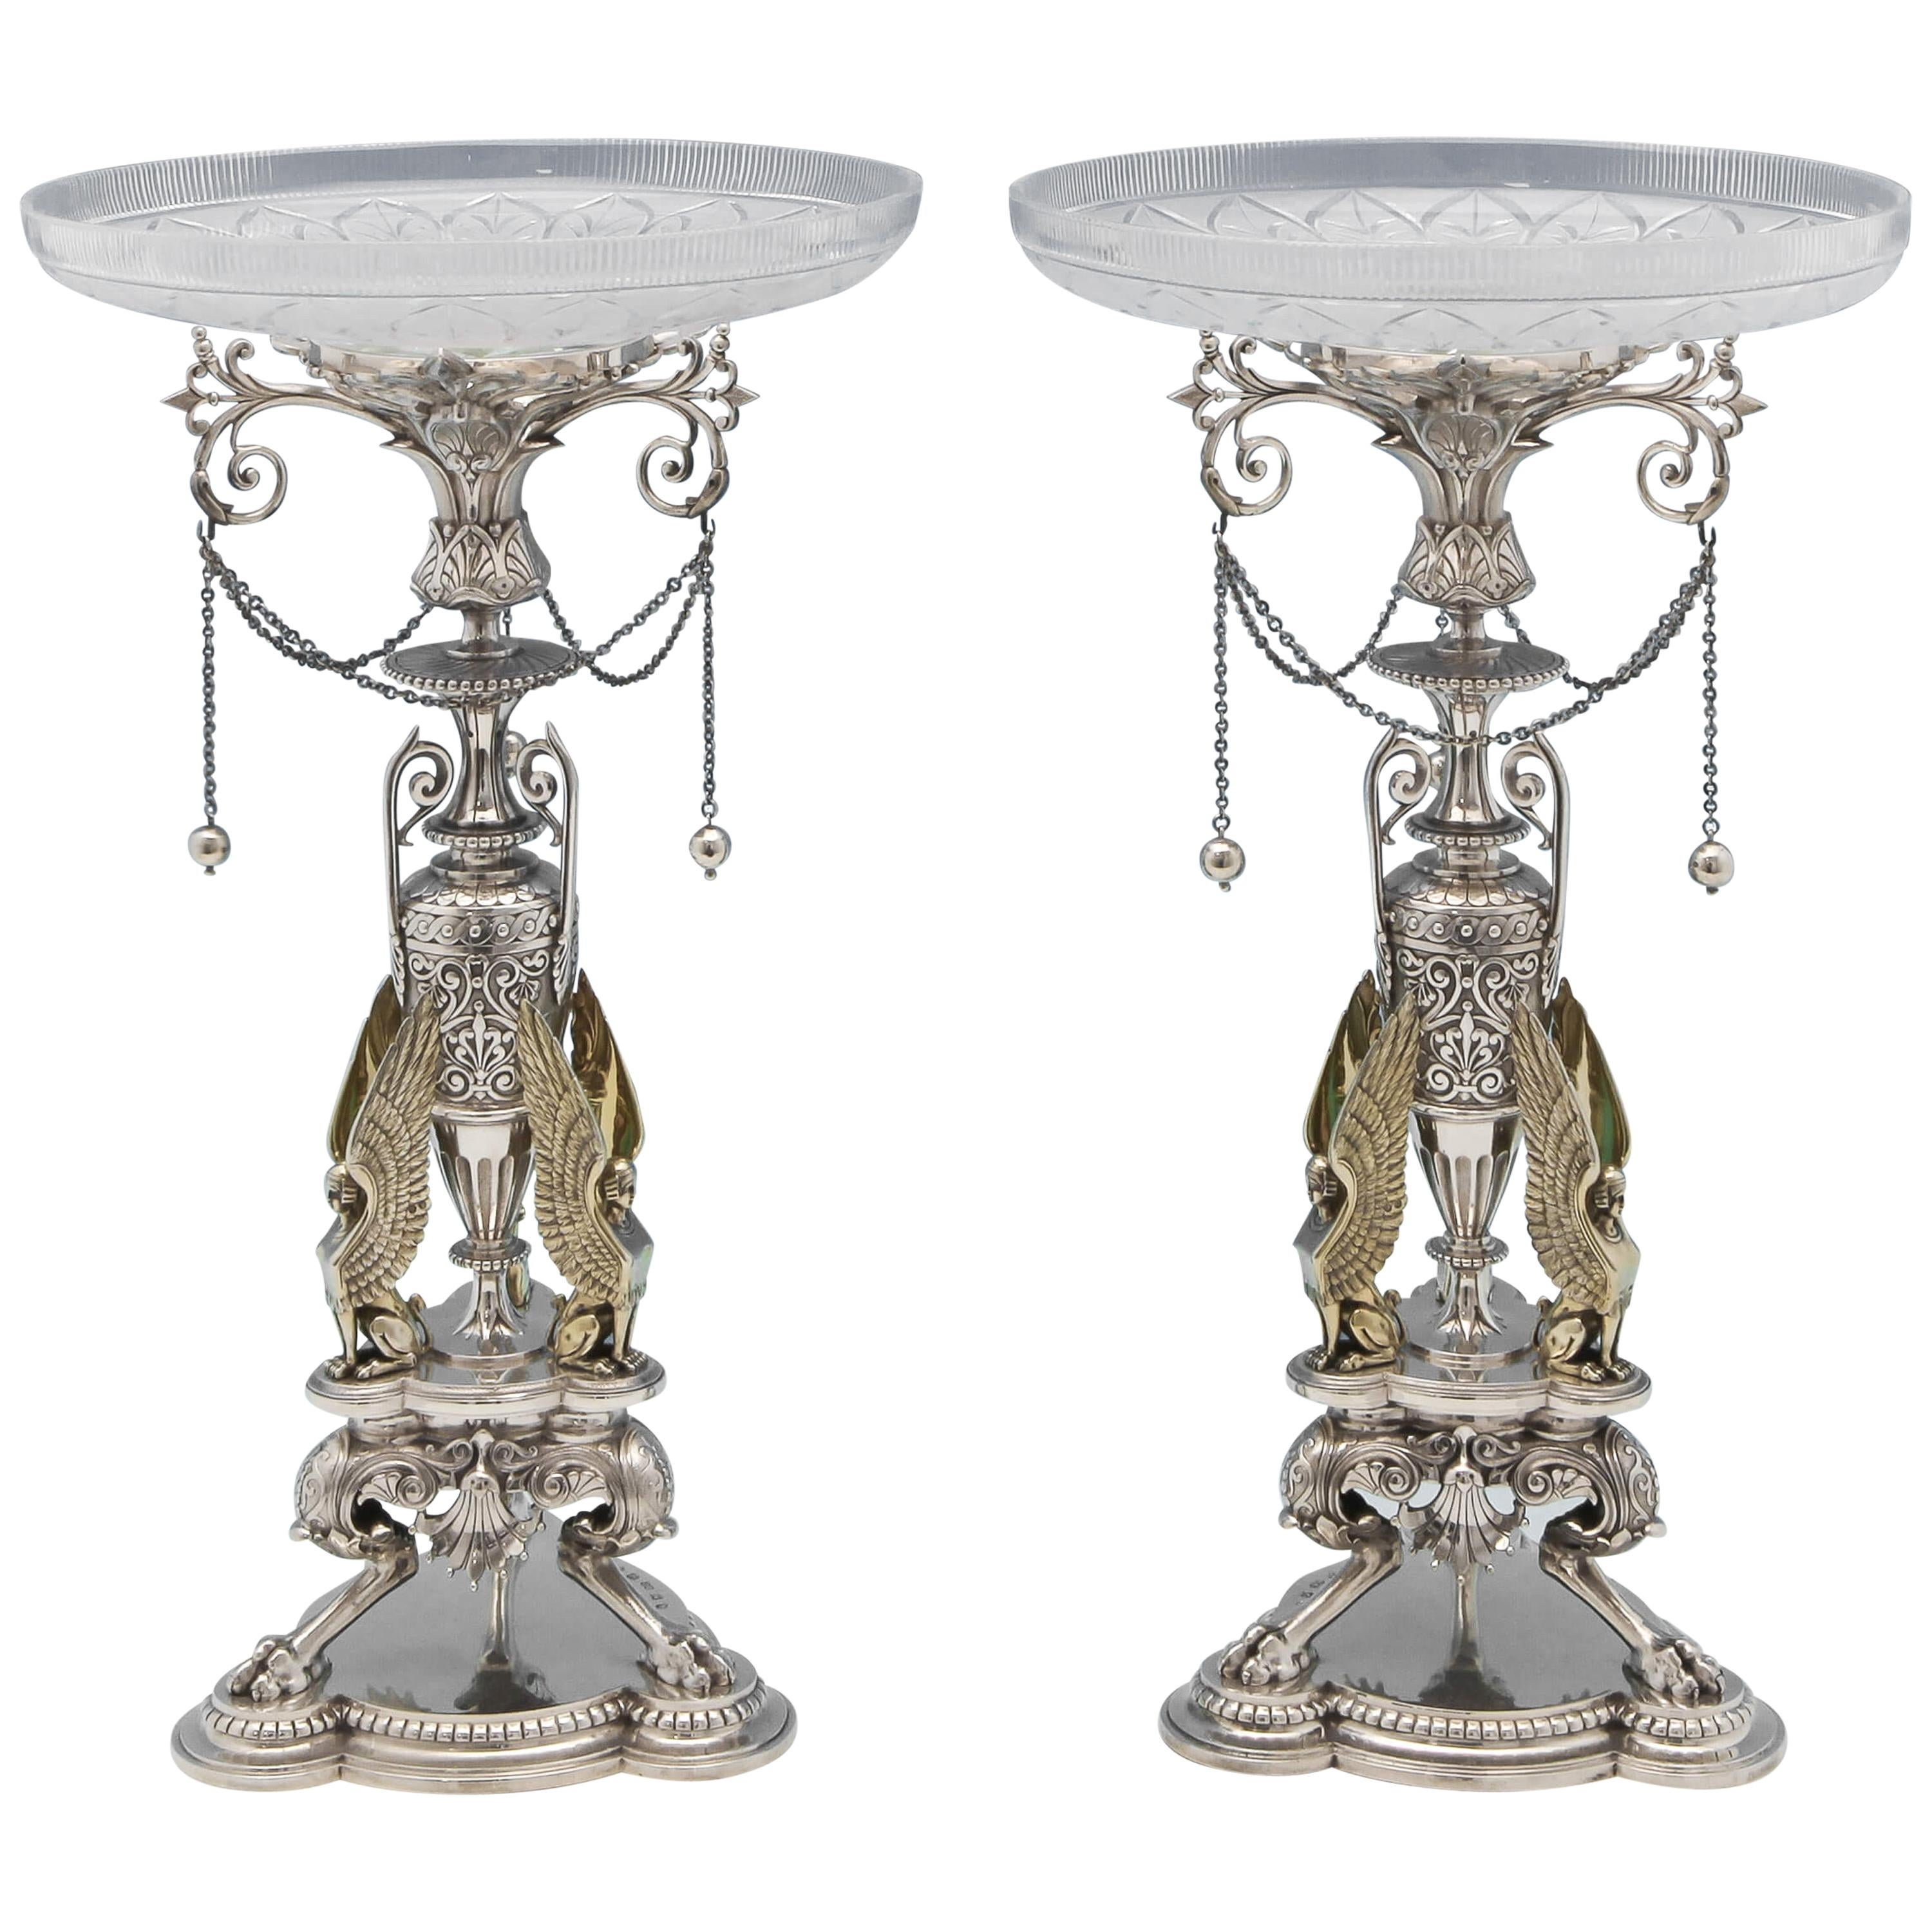 Egyptian Revival Antique Sterling Silver Pair of Dessert Stands by Elkington